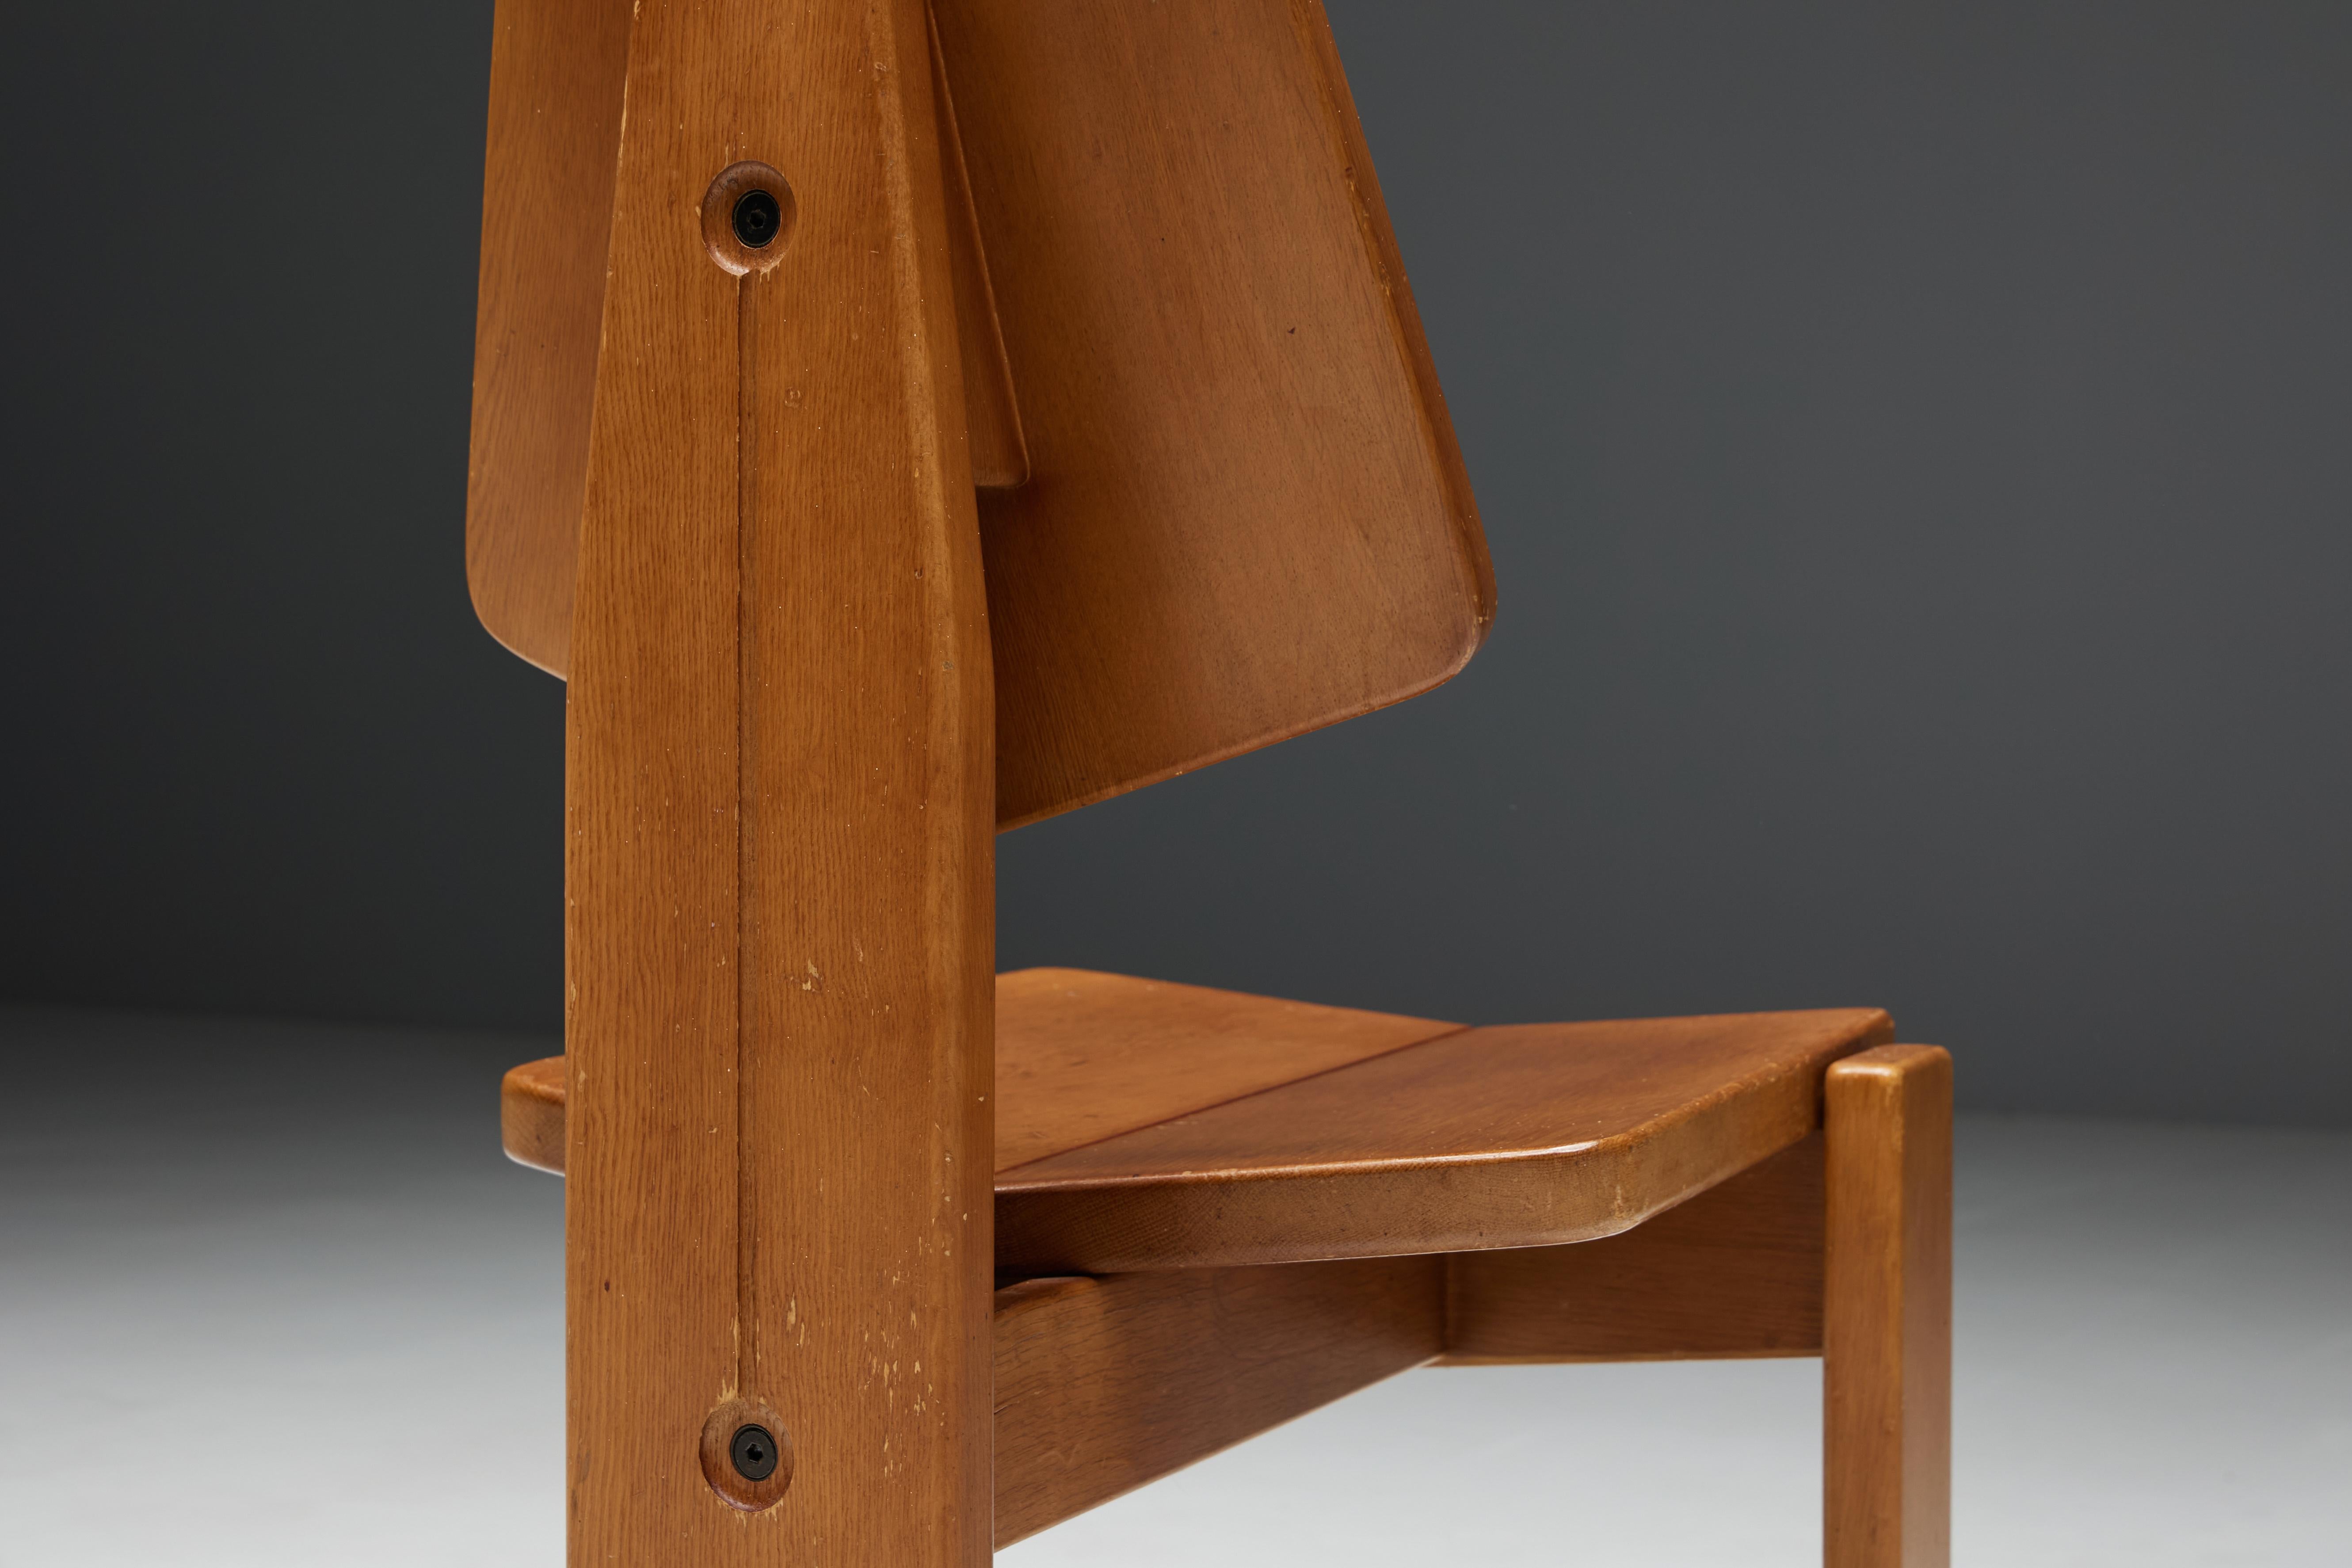 Brutalist Wooden Dining Chairs, Belgium, 1970s For Sale 9